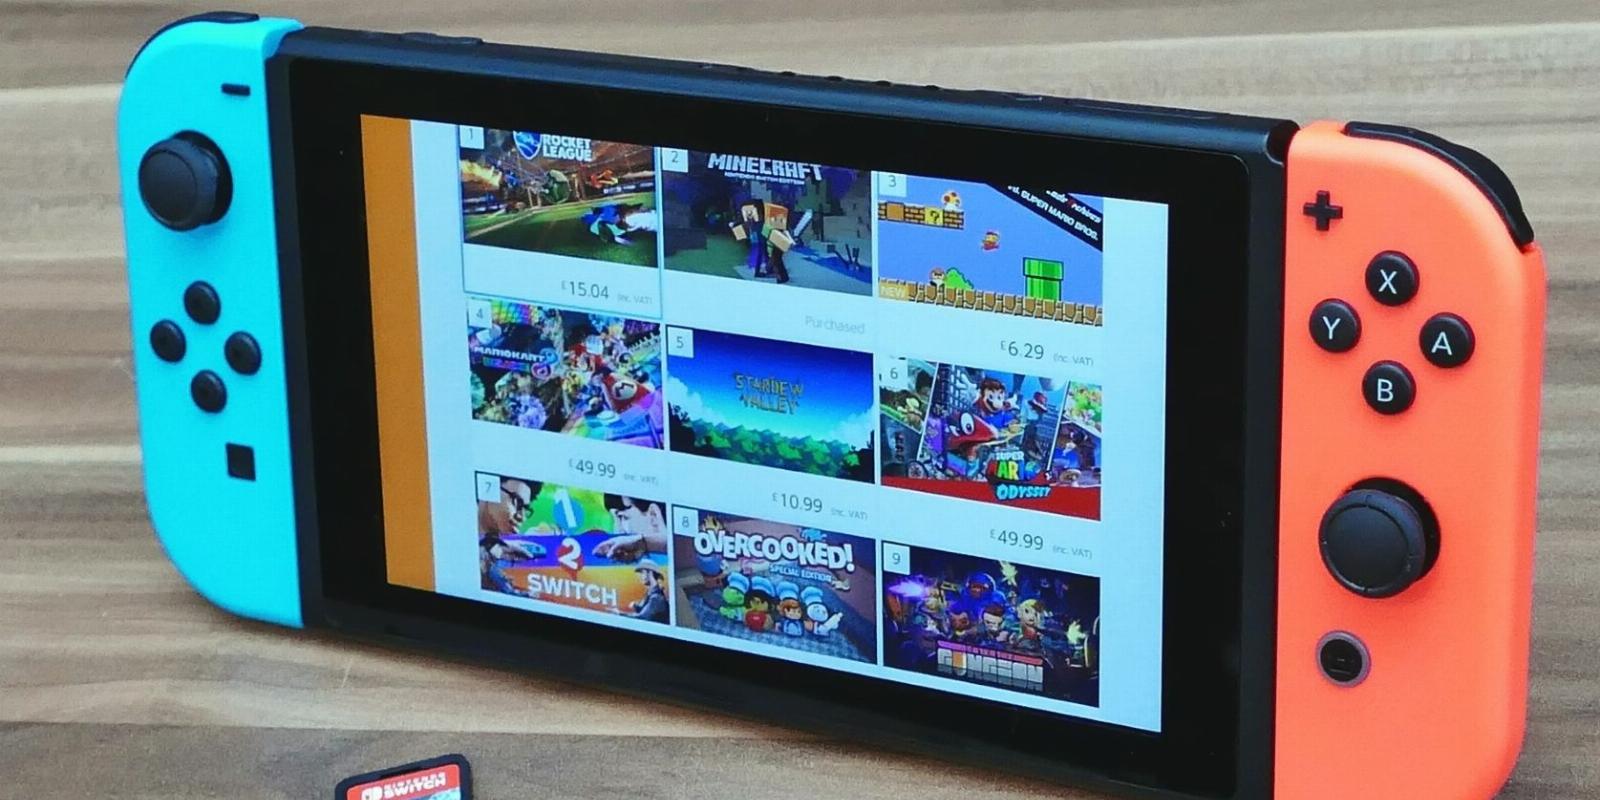 How to Get the Latest Nintendo News and Events on Your Nintendo Switch